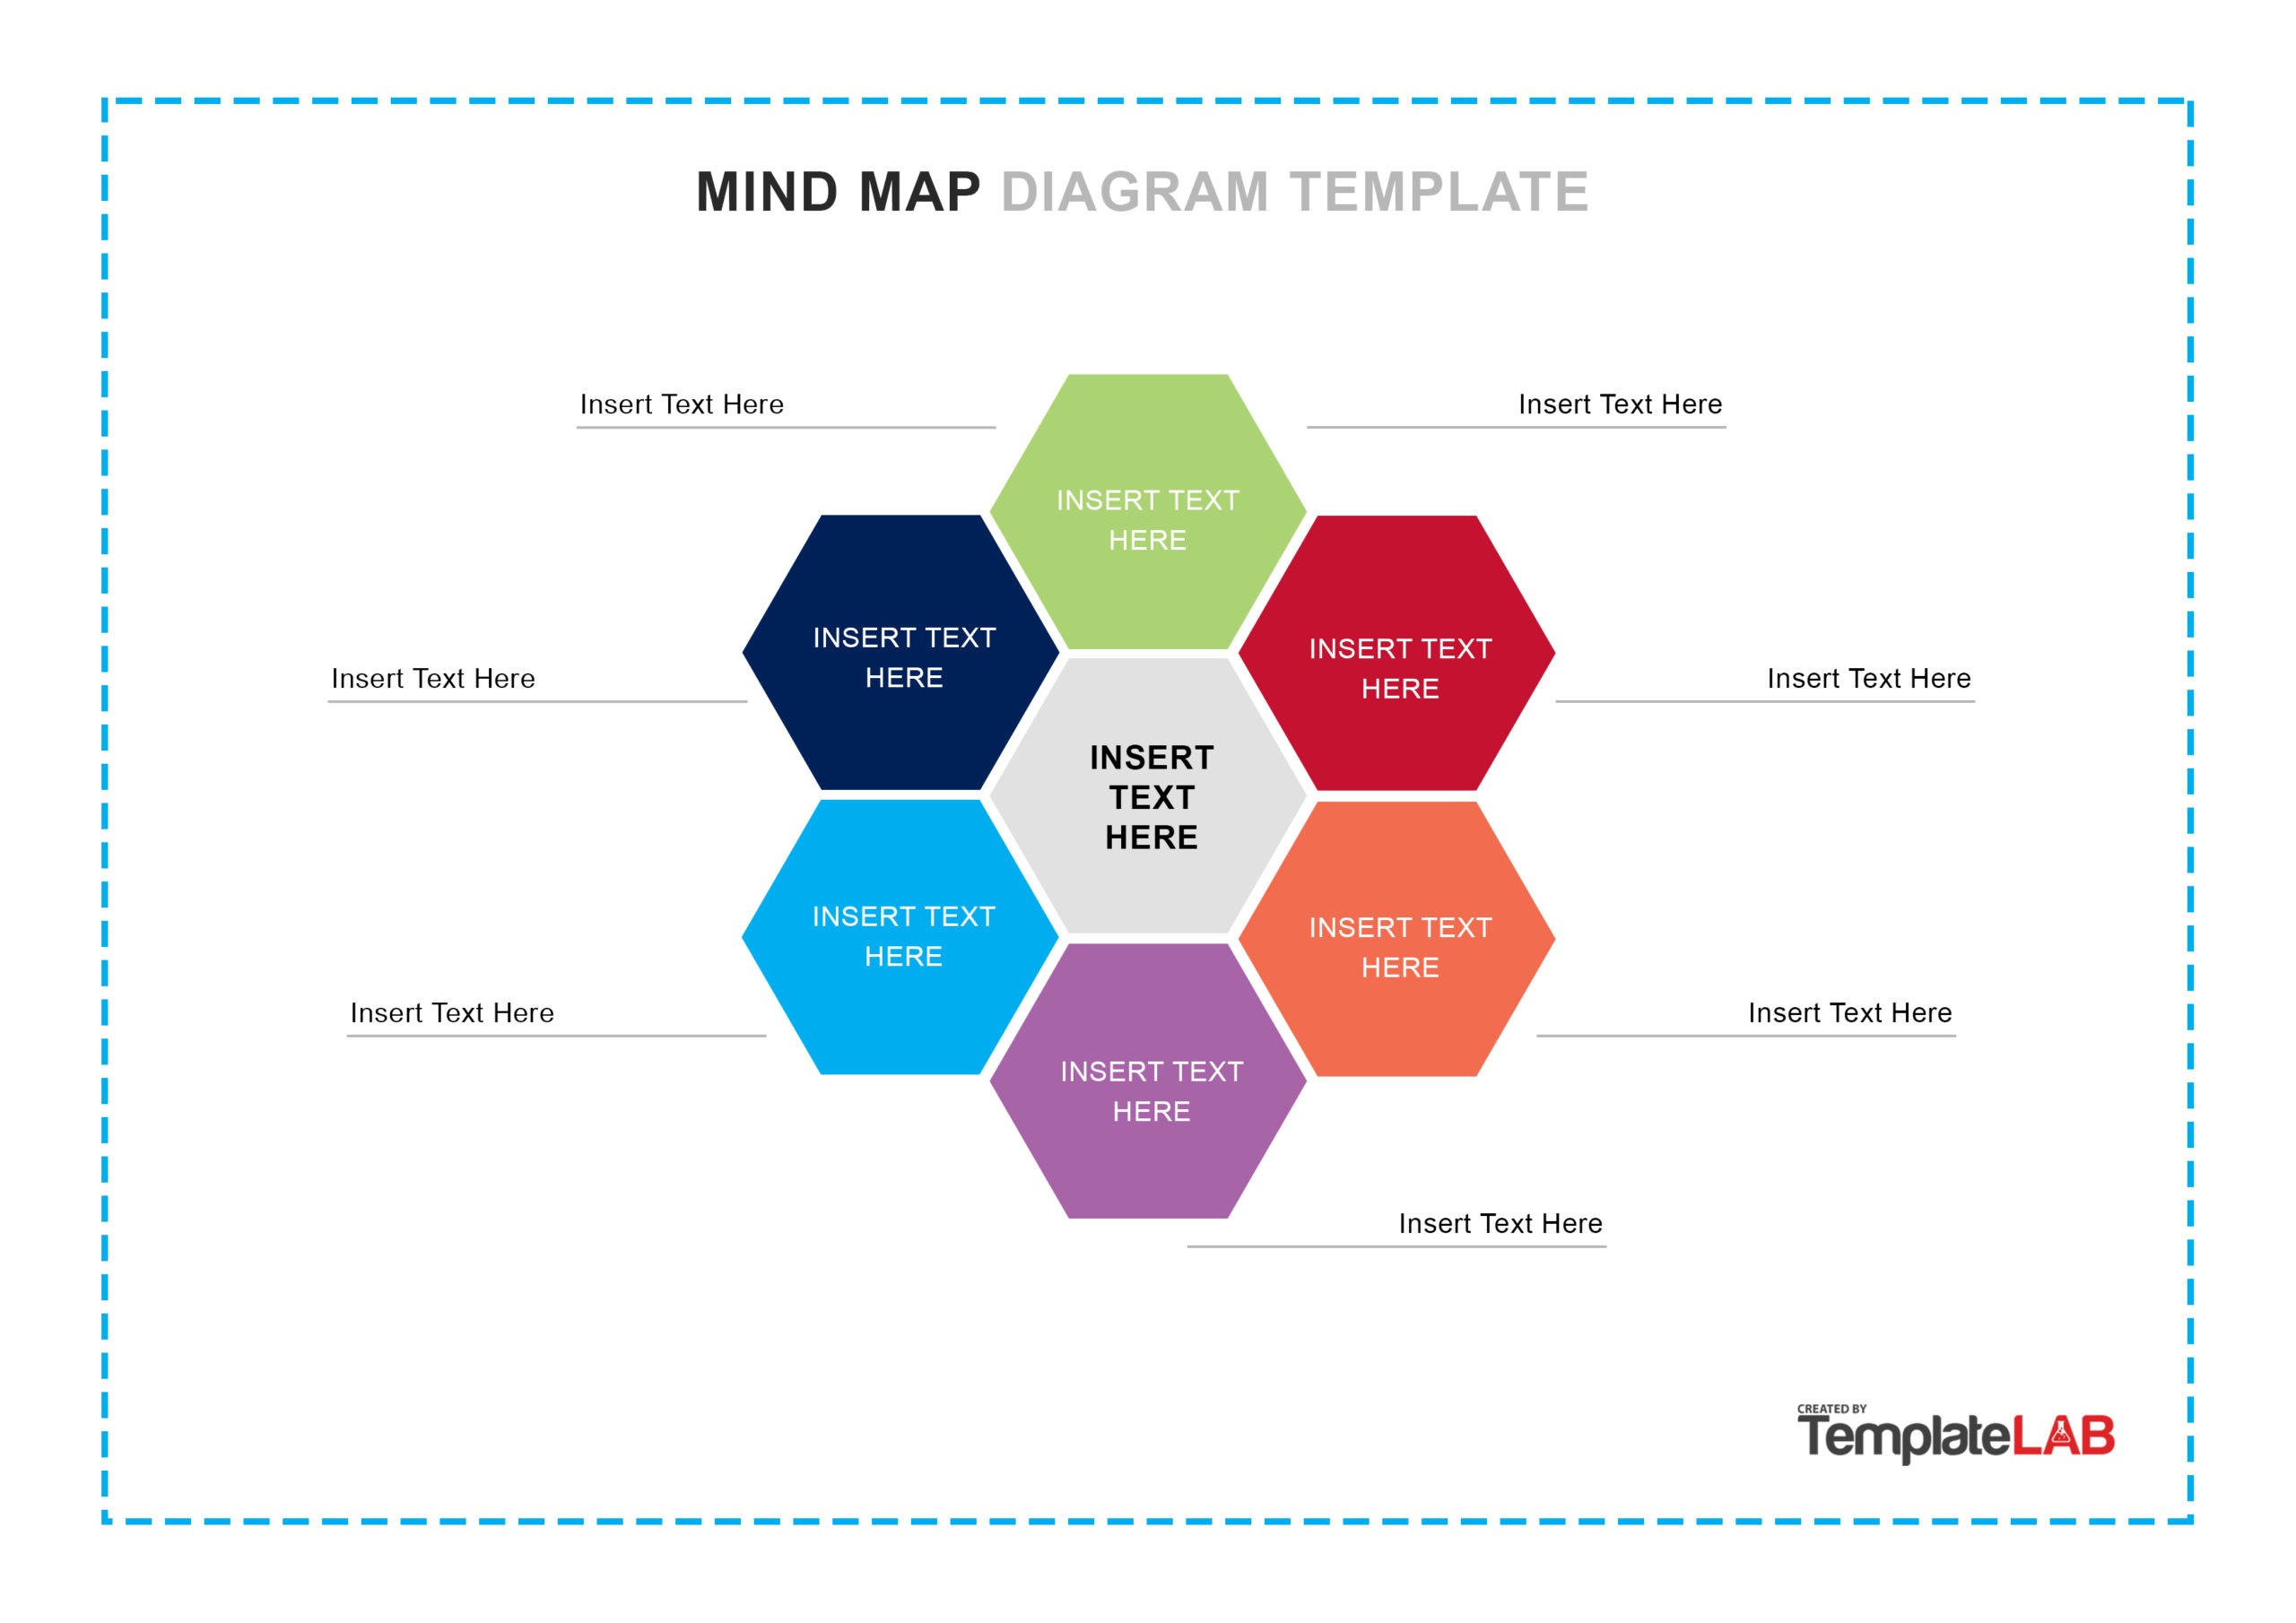 Mind Map Template 04 TemplateLab.com  Scaled ?w=790